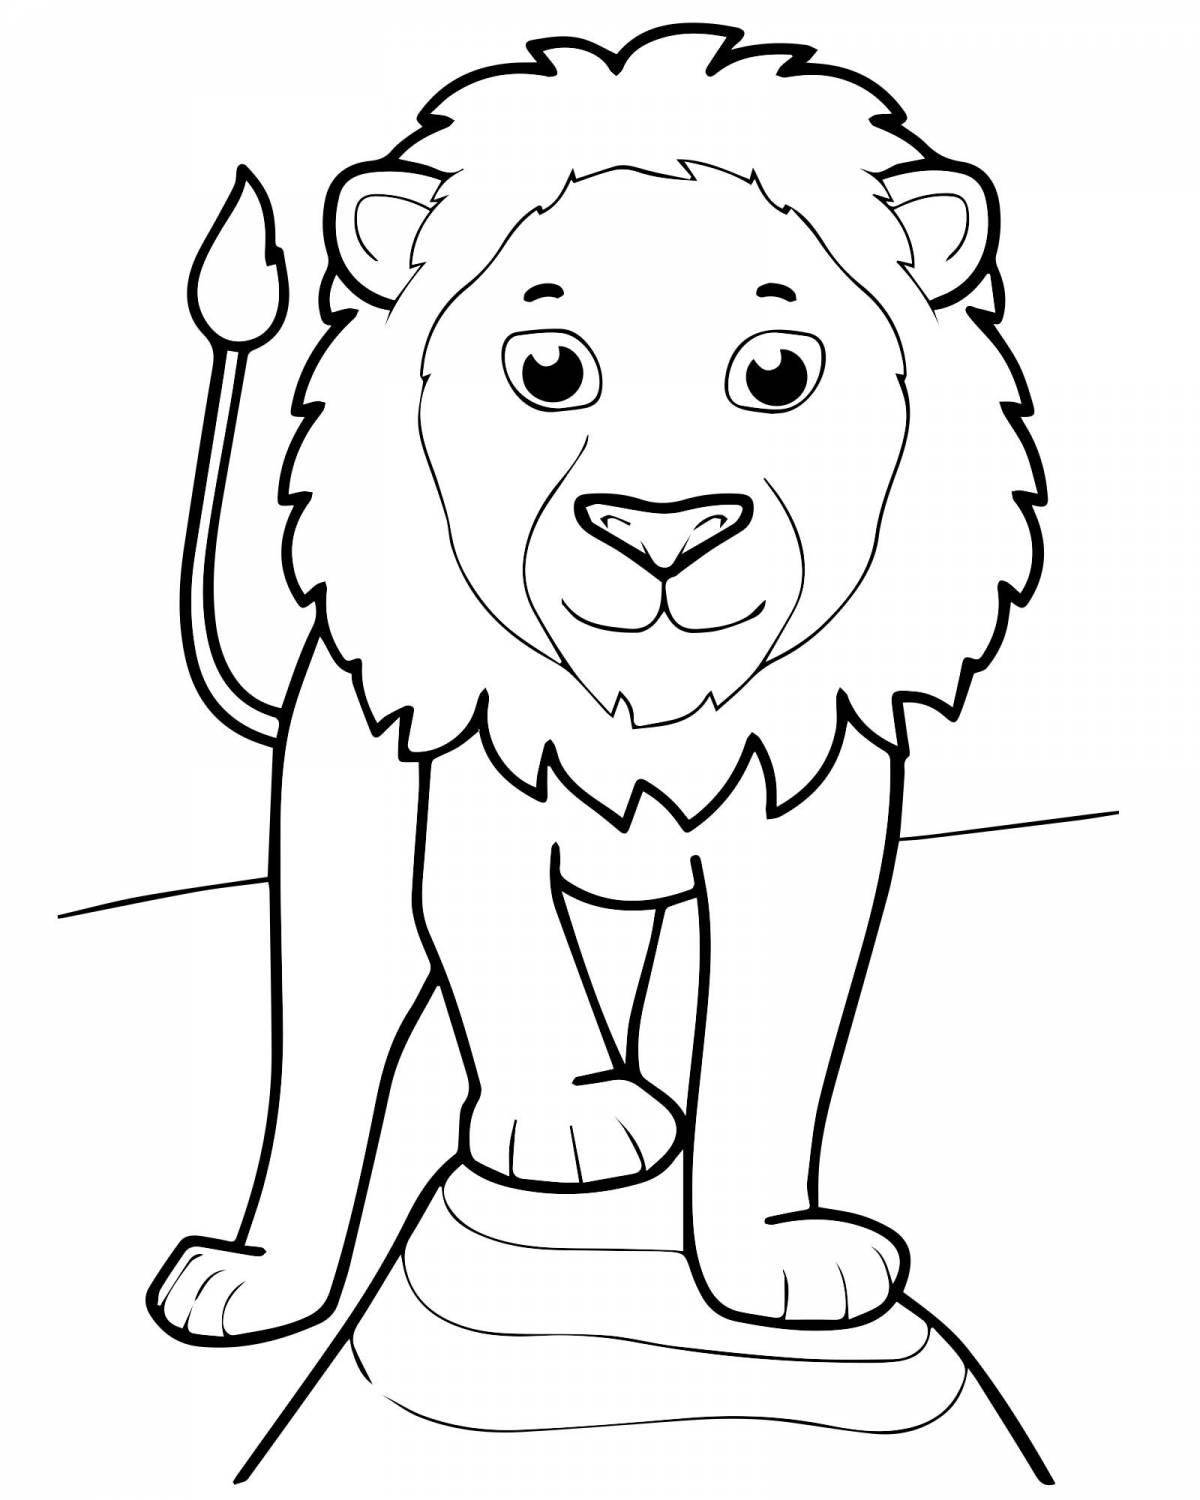 Bright drawing of a lion